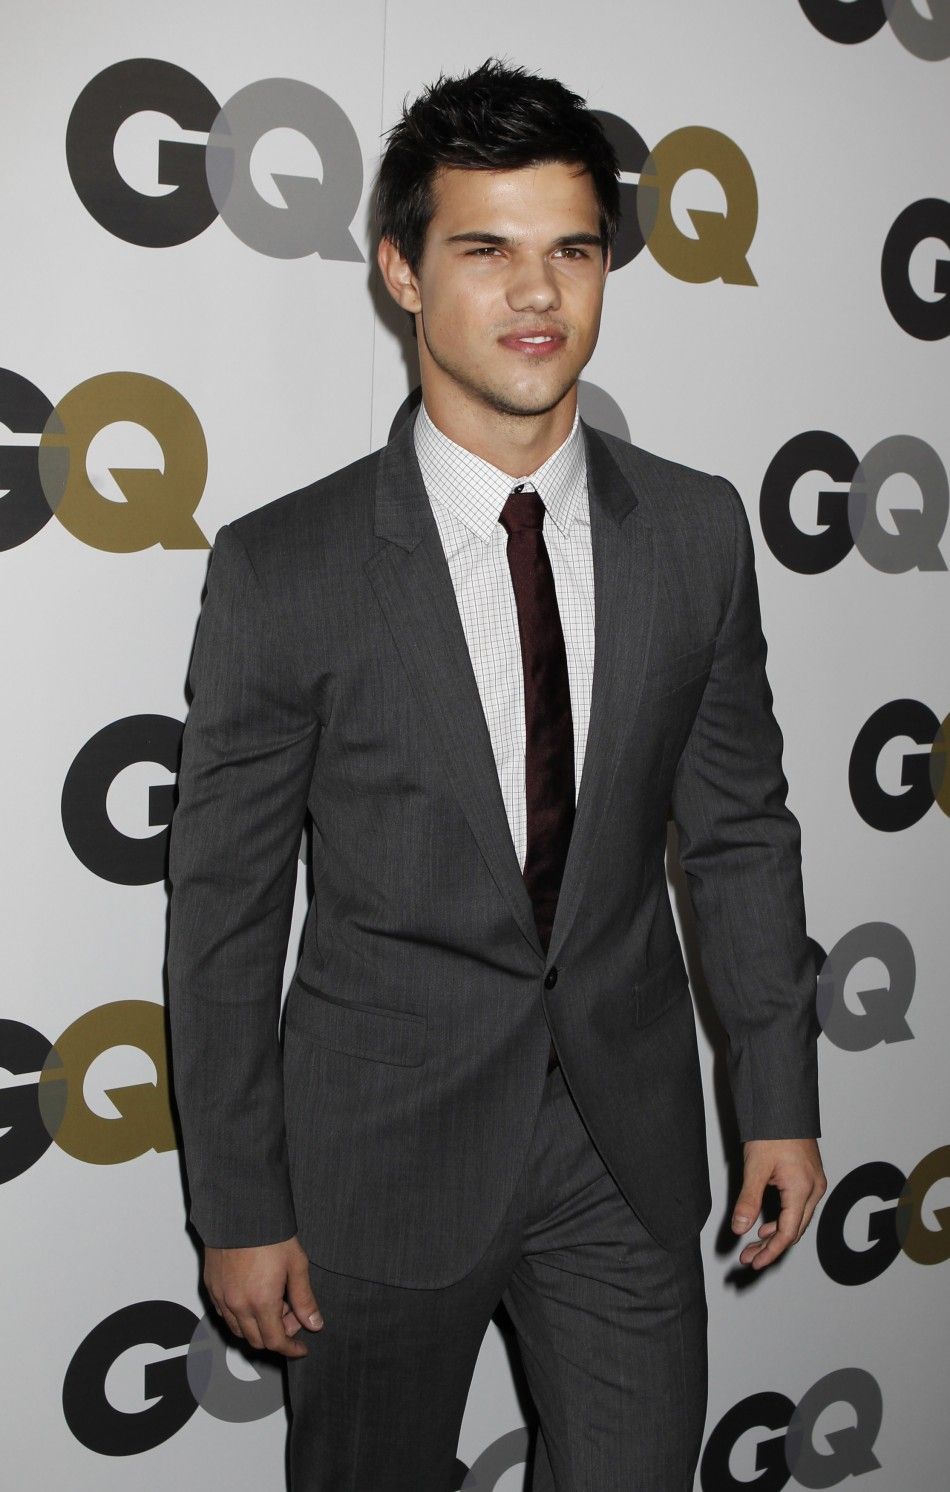 Actor Taylor Lautner arrives at the GQ Magazine 2010 quotMen of the Yearquot Party in Hollywood